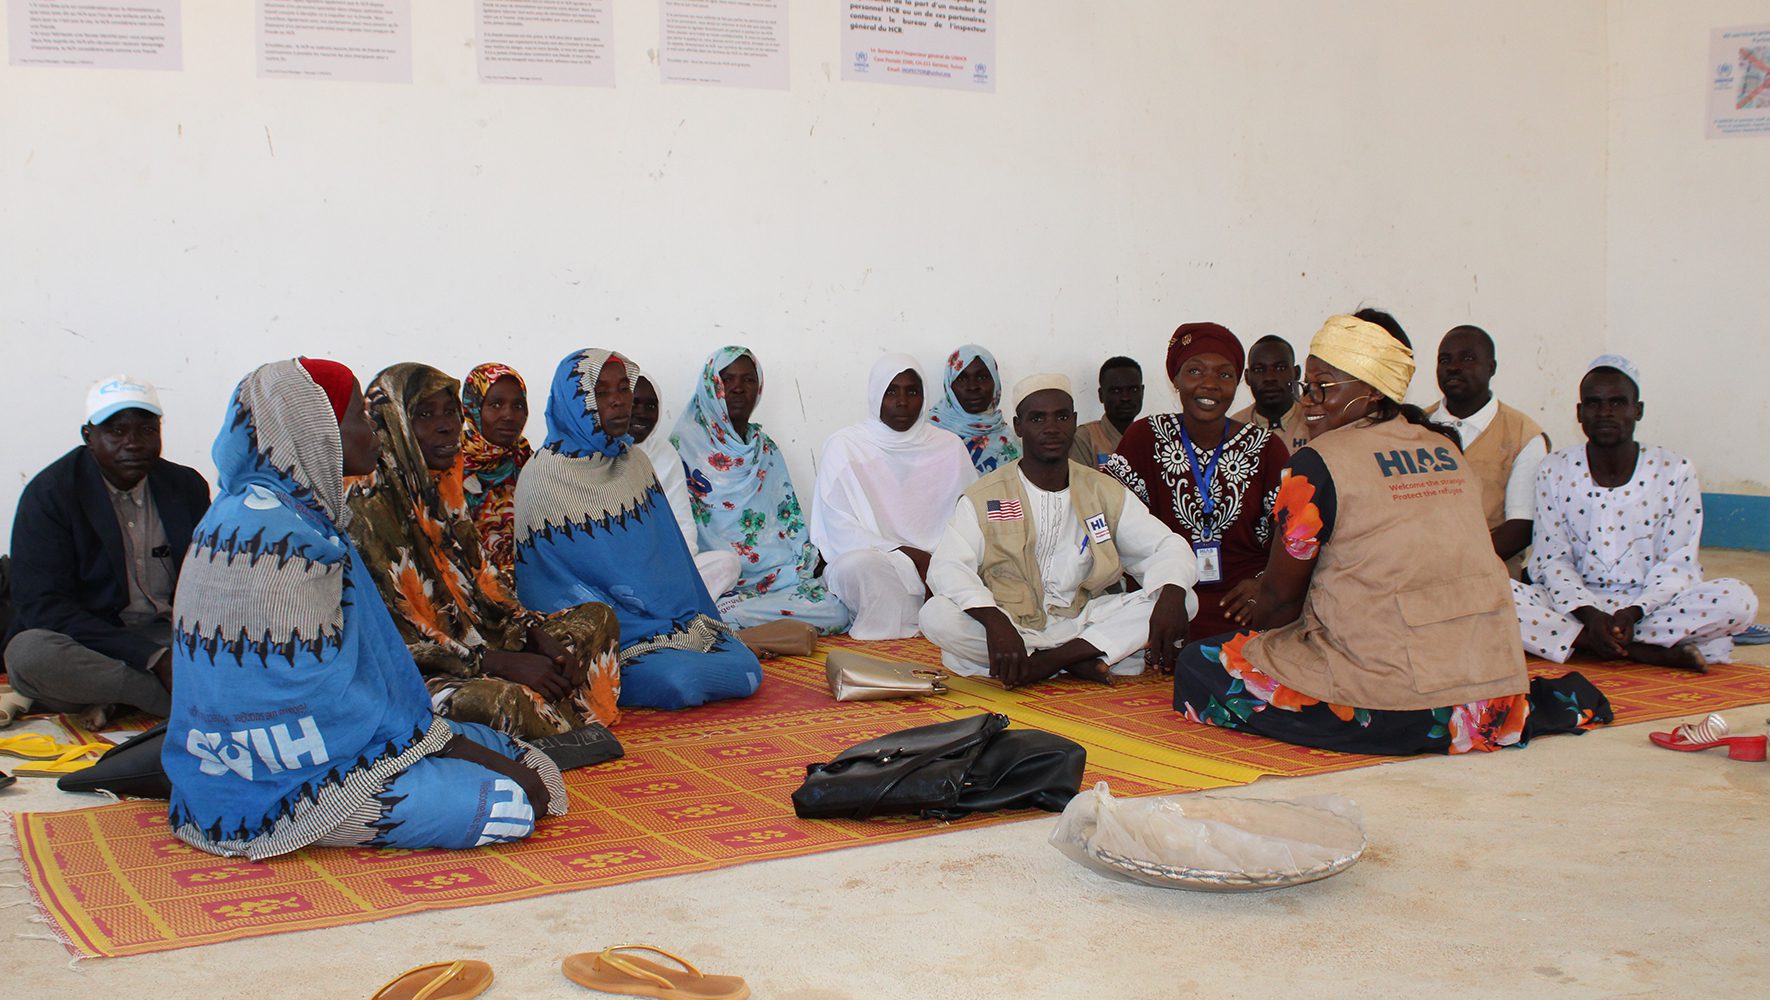 HIAS personnel in Chad and Sudanese refugees engage in a gender-based violence mitigation training session at the HIAS training center at the Gaga Refugee Camp in eastern Chad on August 10, 2023.